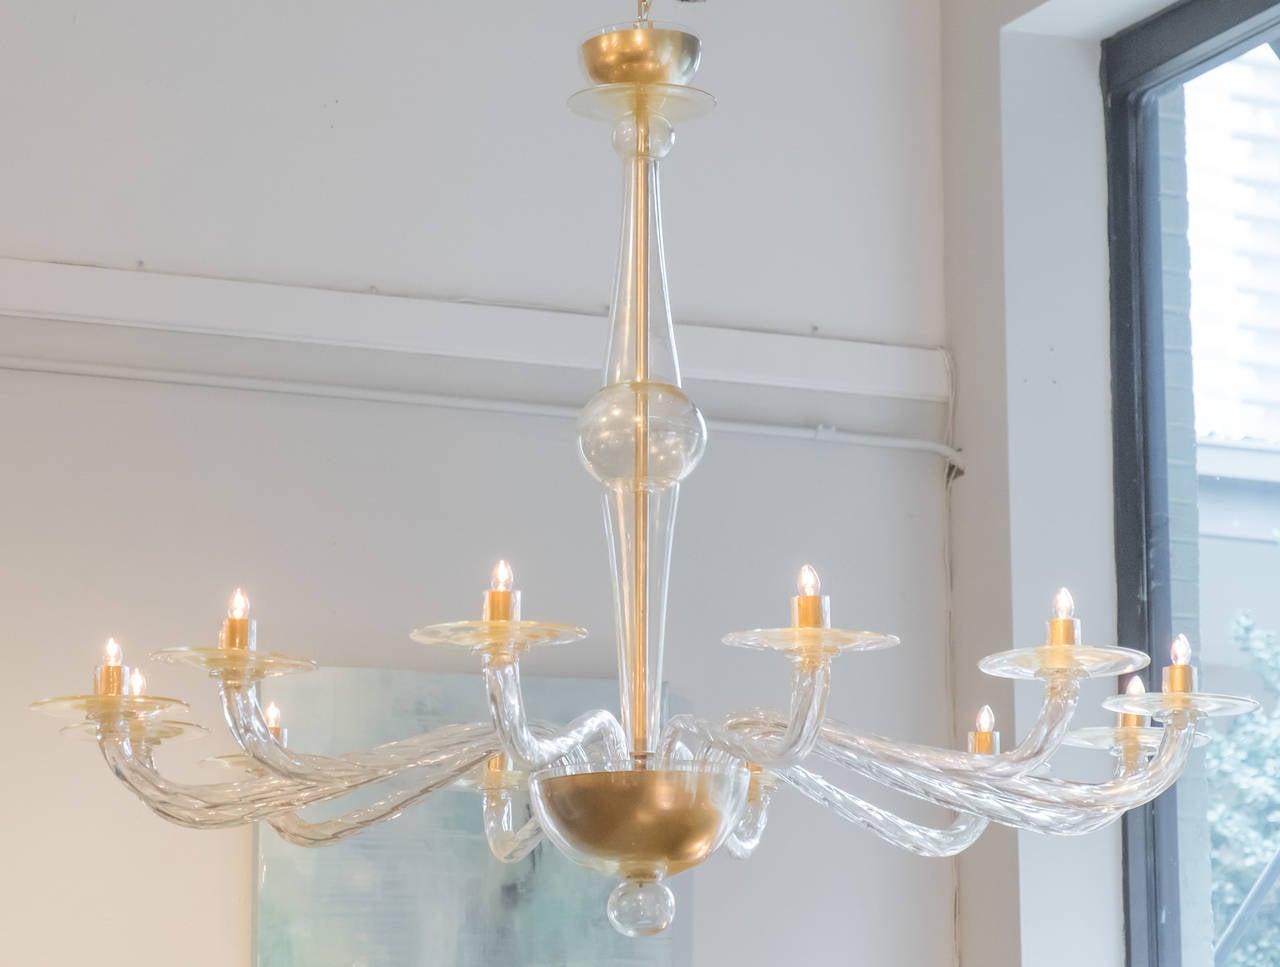 Italian modernist chandelier in Murano "avventurina" glass, with 12 torsado branches, rewired for the US. Height with included chain and matching glass canopy is 73 1/8 in. A very pure design in line with the works of Seguso.
Avventurina